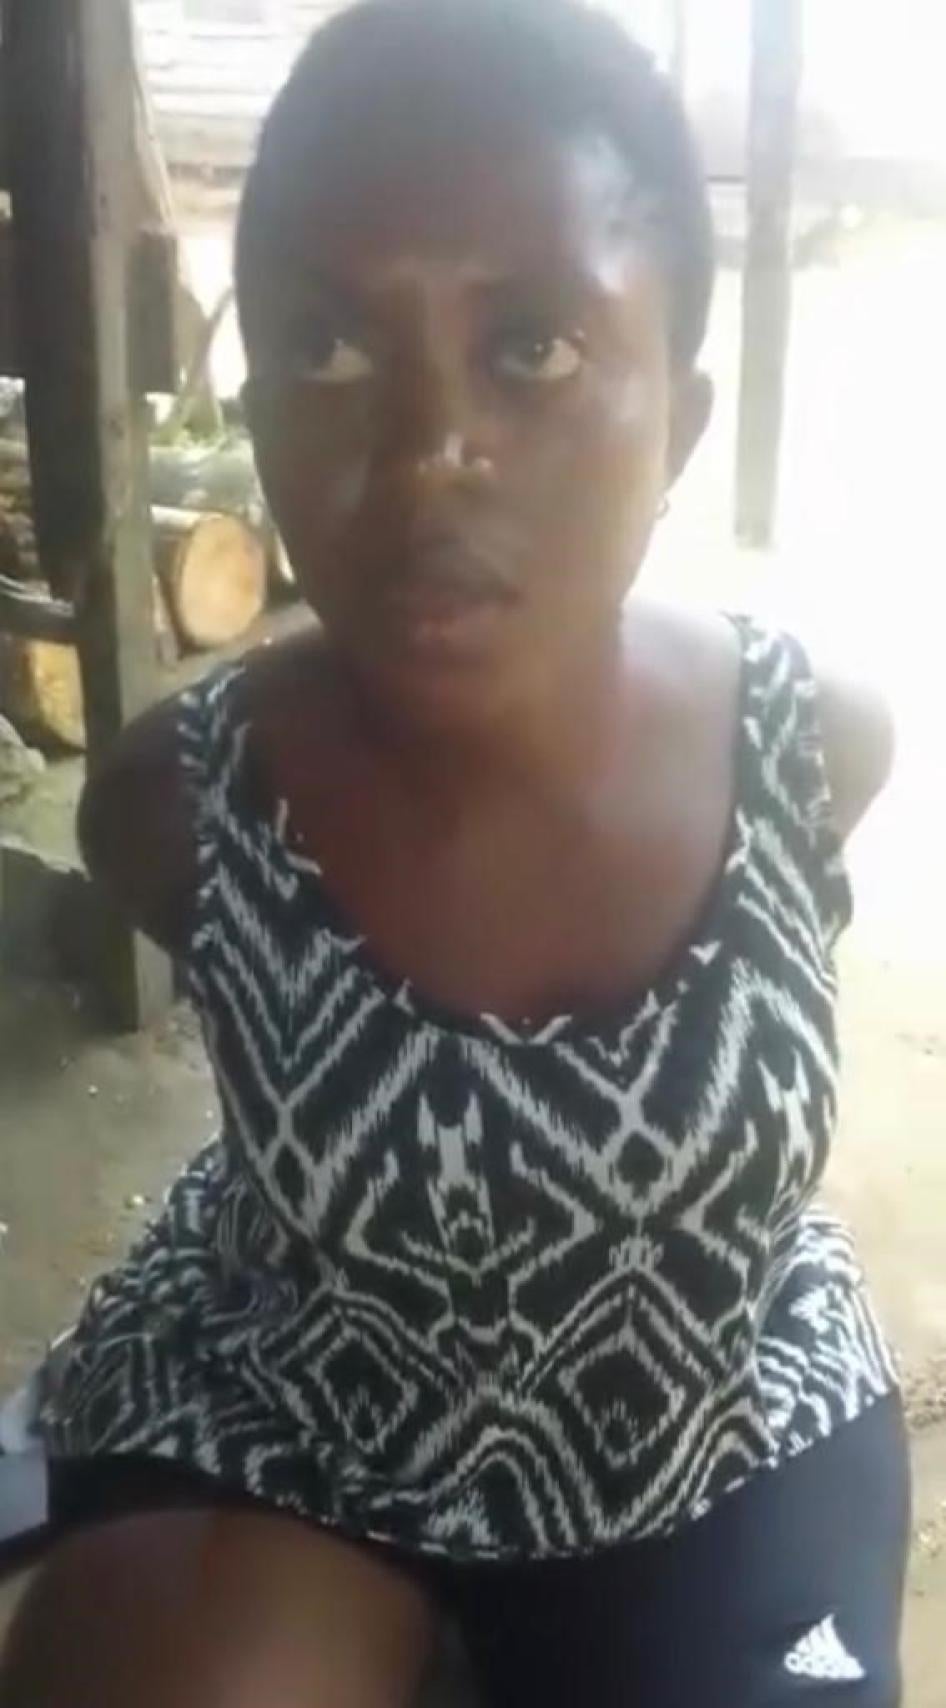  A screenshot of the video showing Confort Tumassang being interrogated and threatened by armed separatists before her killing, August 11, 2020, Muyuka, South-West region, Cameroon  